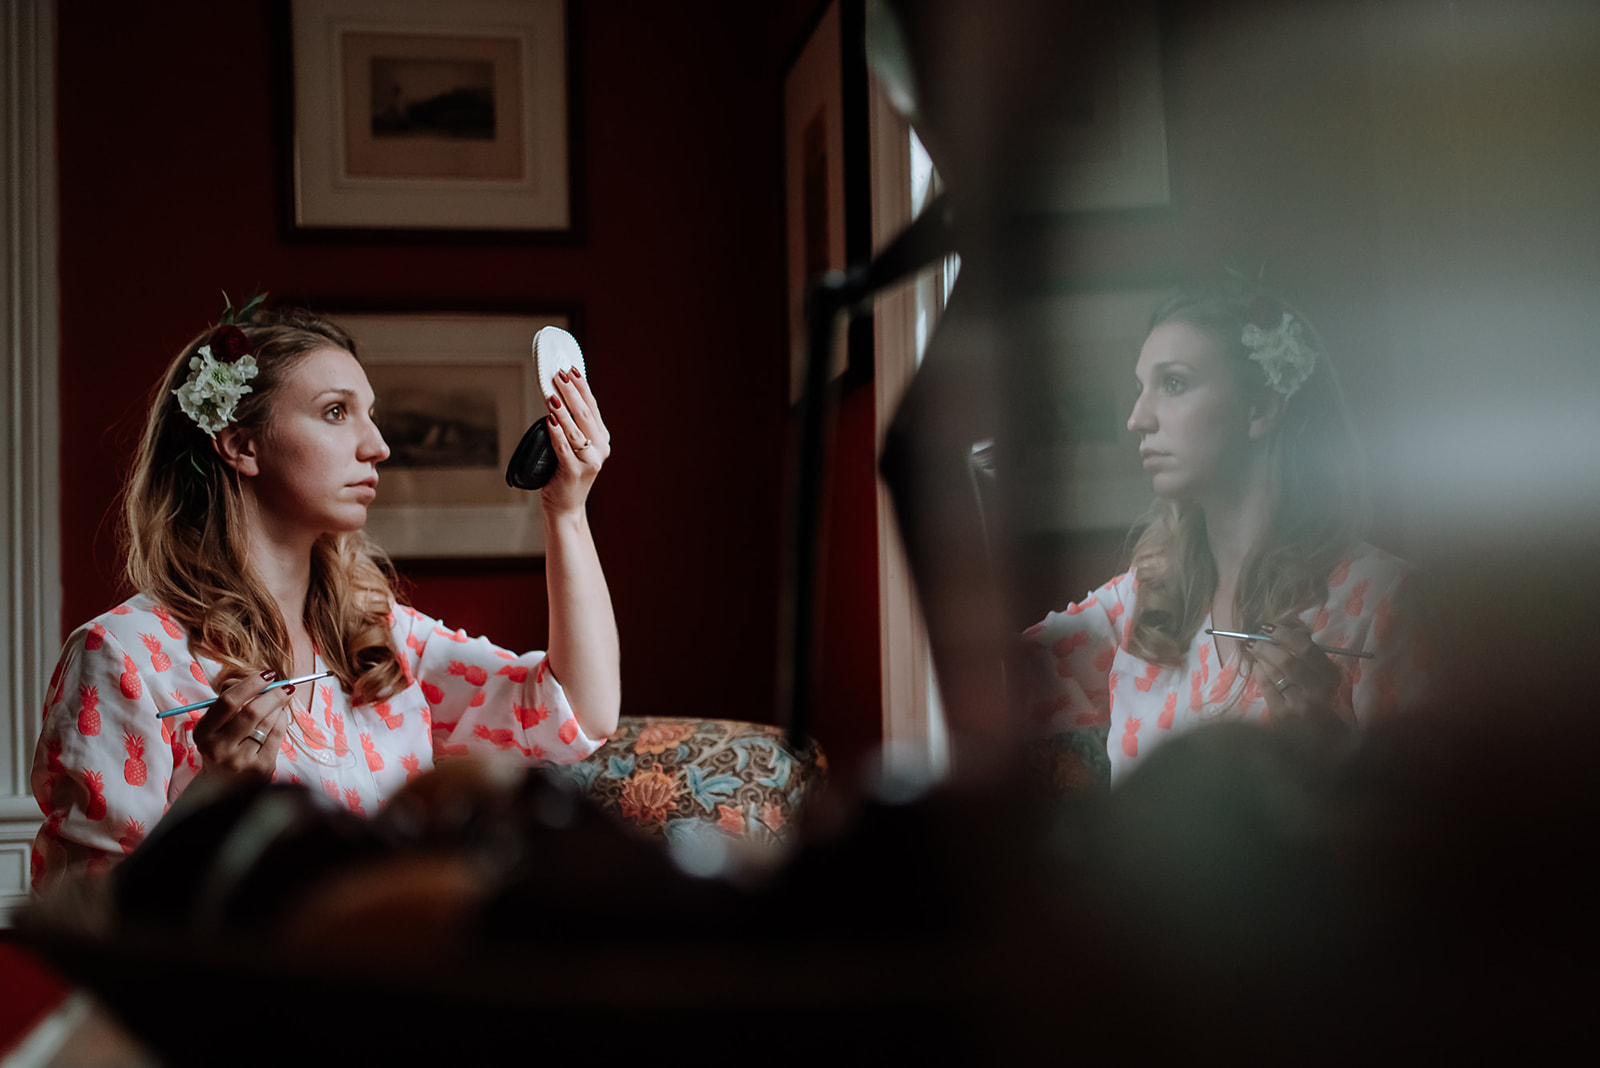 Bride and her reflection while she holds up a compact to look in the mirror.